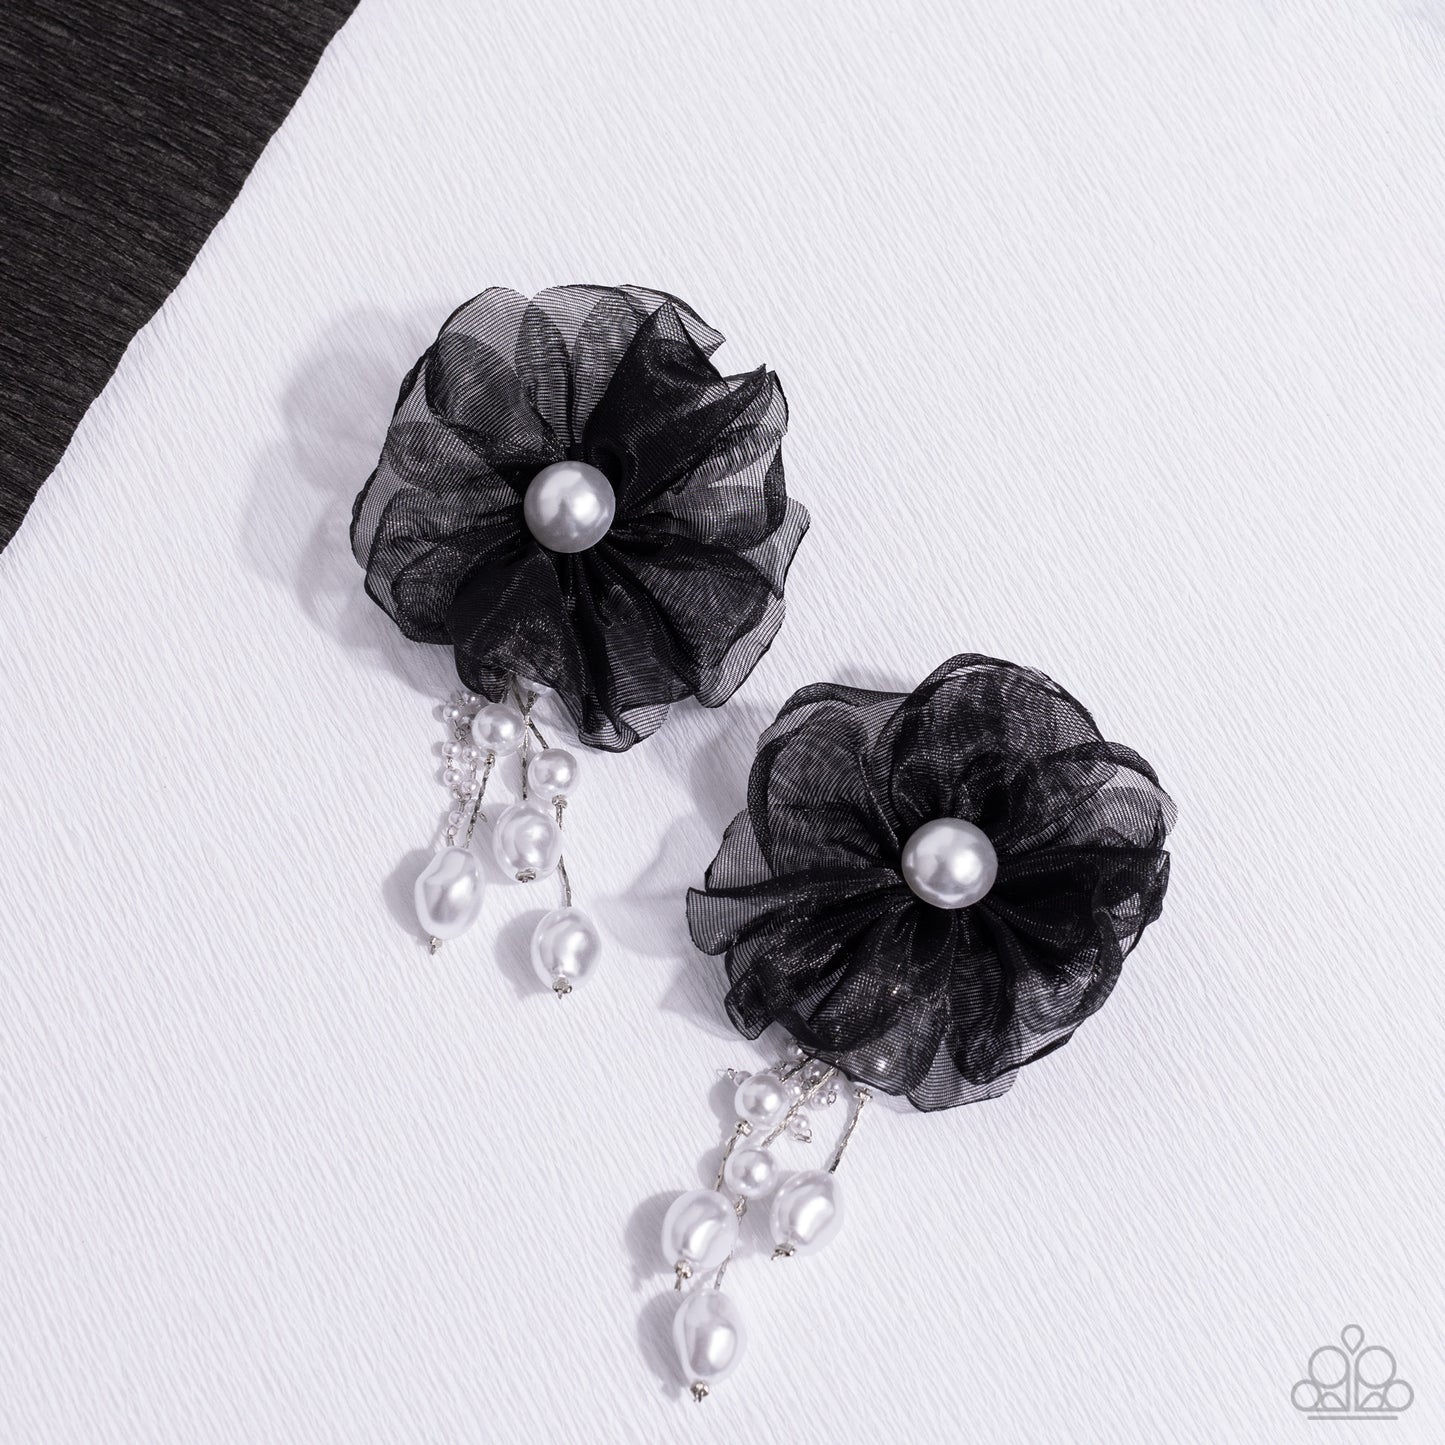 Dripping In Decadence - Black Earrings - Paparazzi Accessories